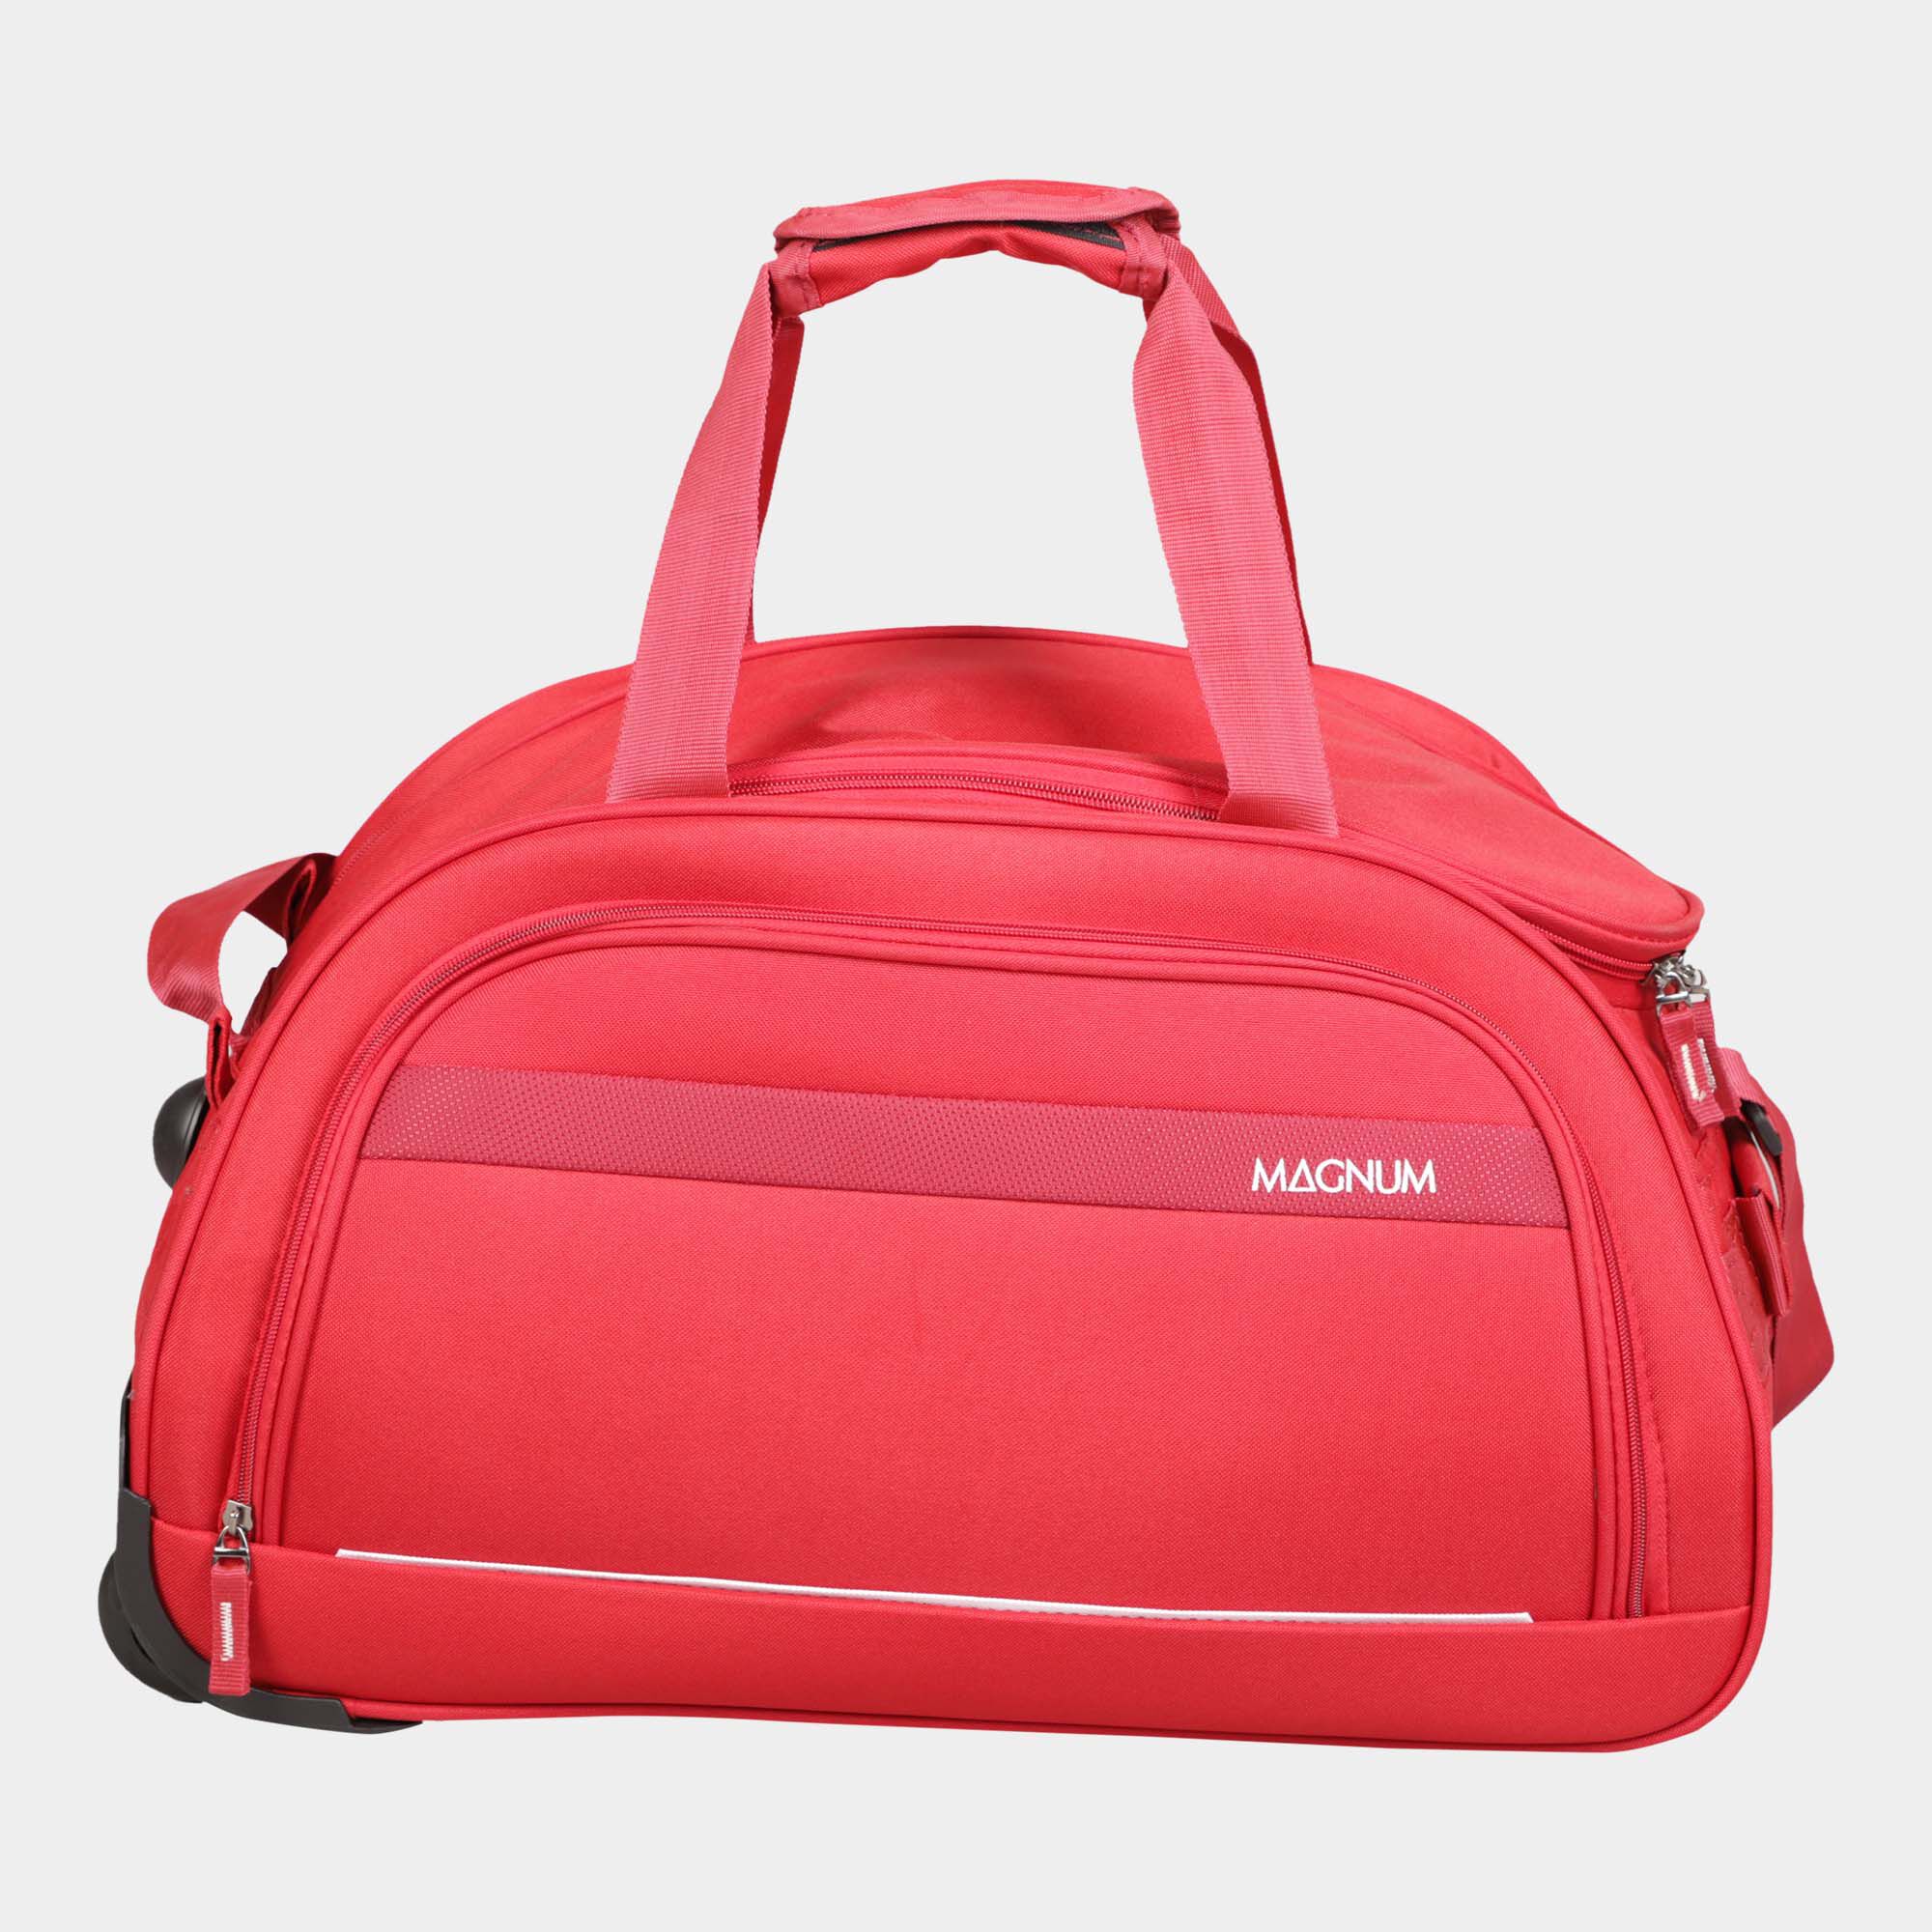 Buy Safari Magnum Polyester Luggage Bag 55CM Online  3599 from ShopClues